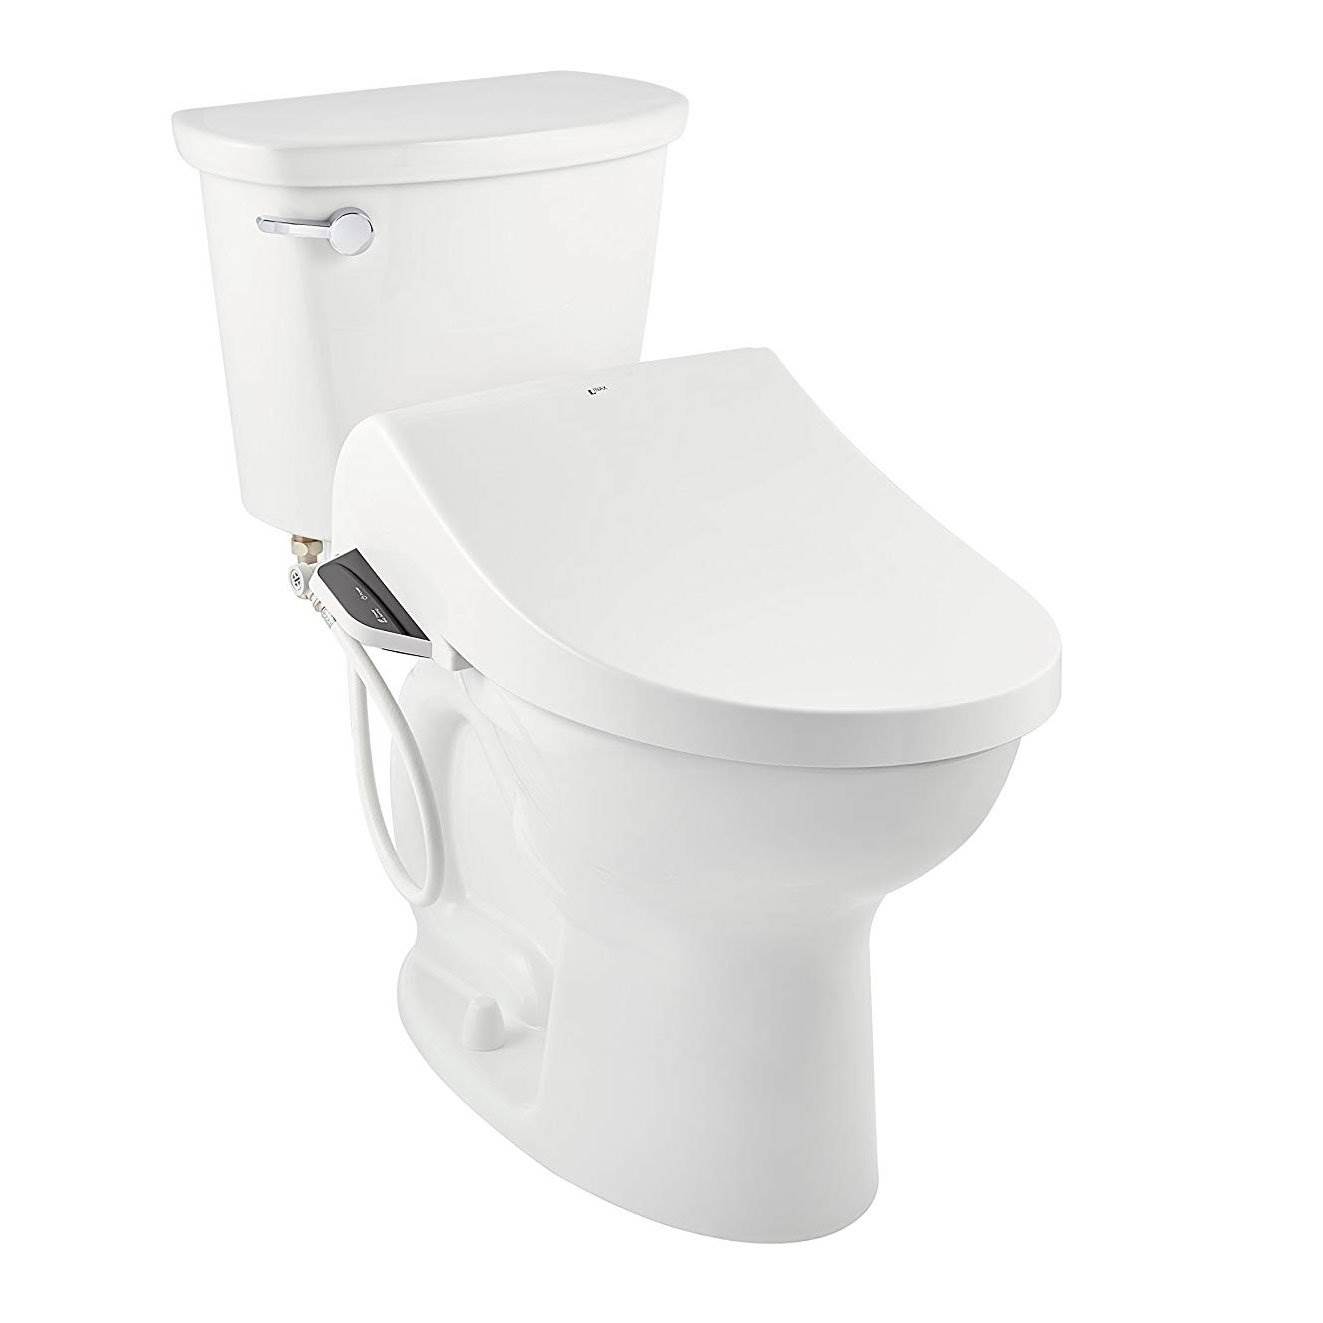 American Standard INAX 415 Heated Dual Nozzle Shower Bidet Toilet Seat w/ Remote - image 3 of 6